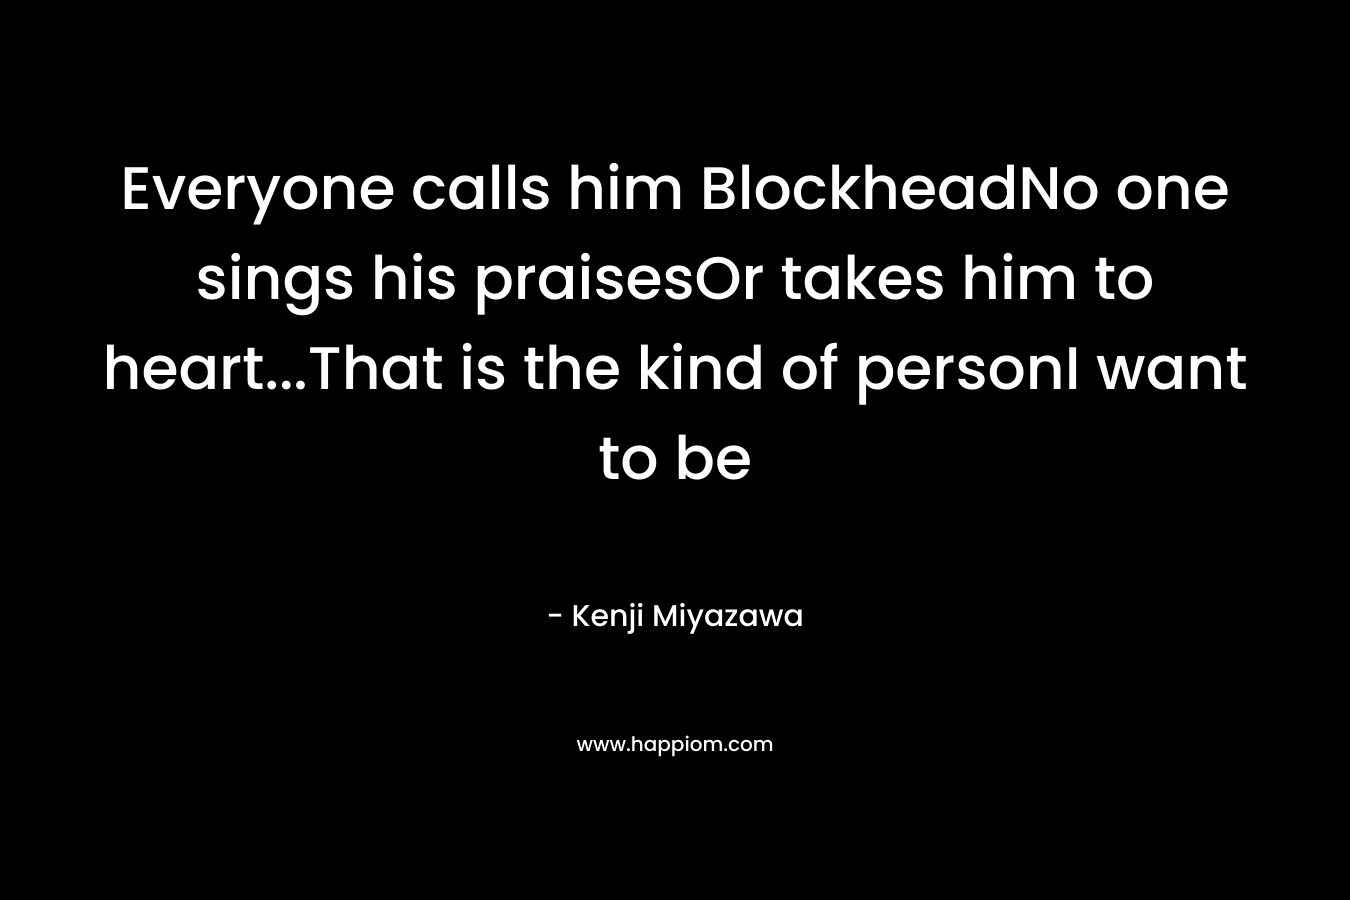 Everyone calls him BlockheadNo one sings his praisesOr takes him to heart...That is the kind of personI want to be